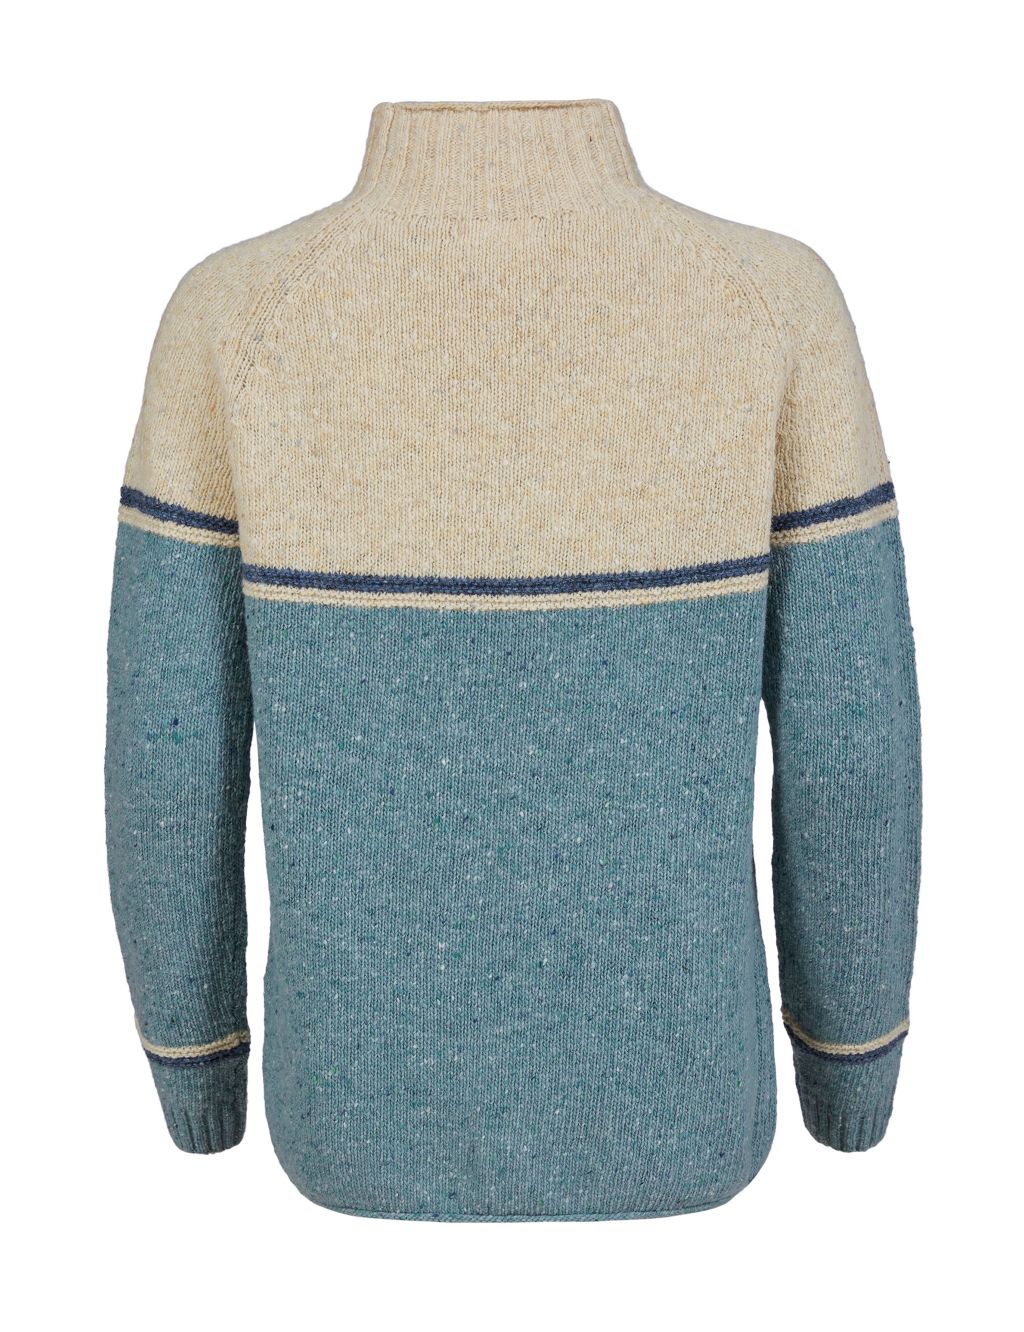 Pure Lambswool Colour Block Jumper image 5